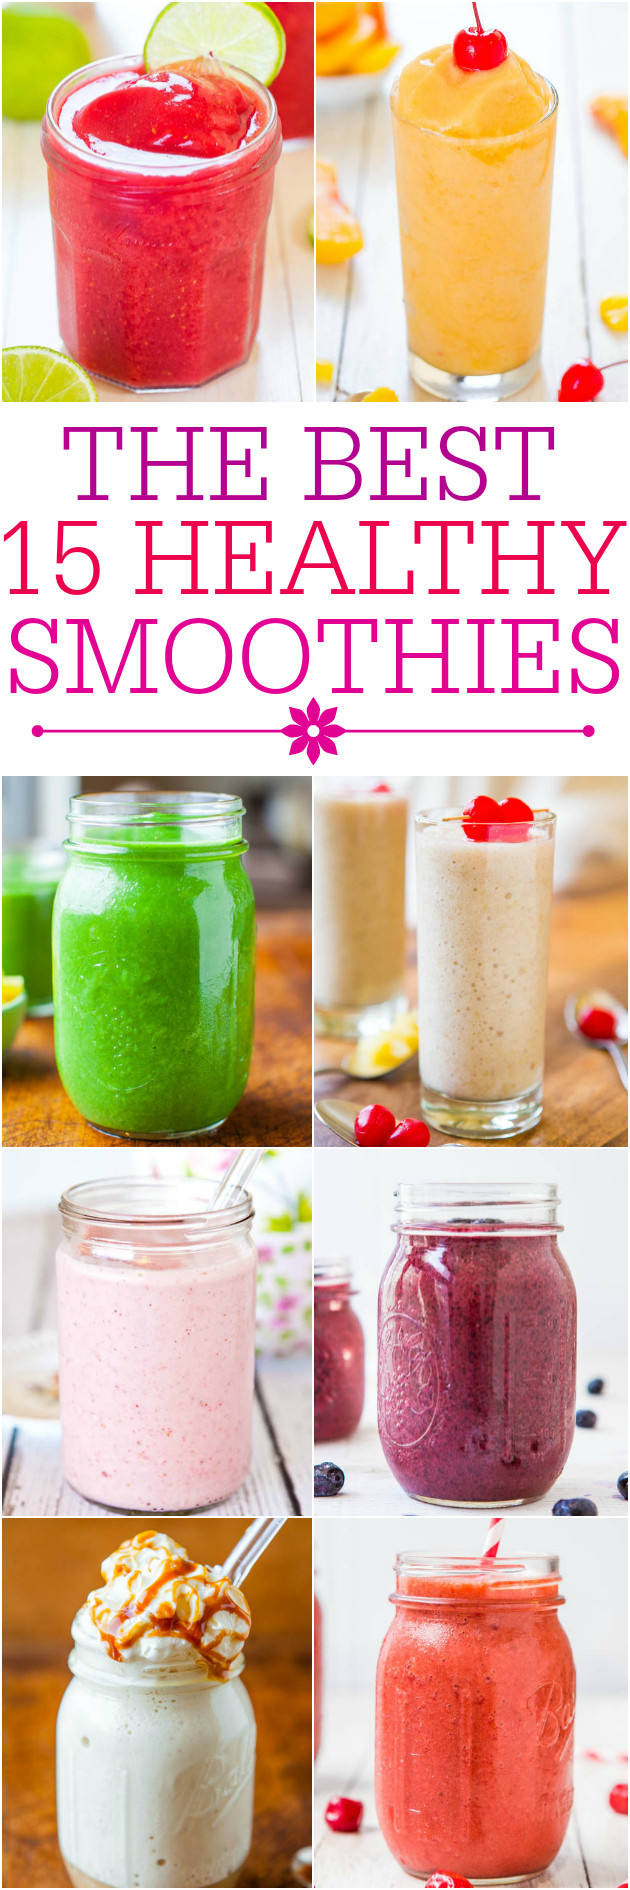 Recipes For Healthy Smoothies
 Fruit and Yogurt Smoothie Averie Cooks